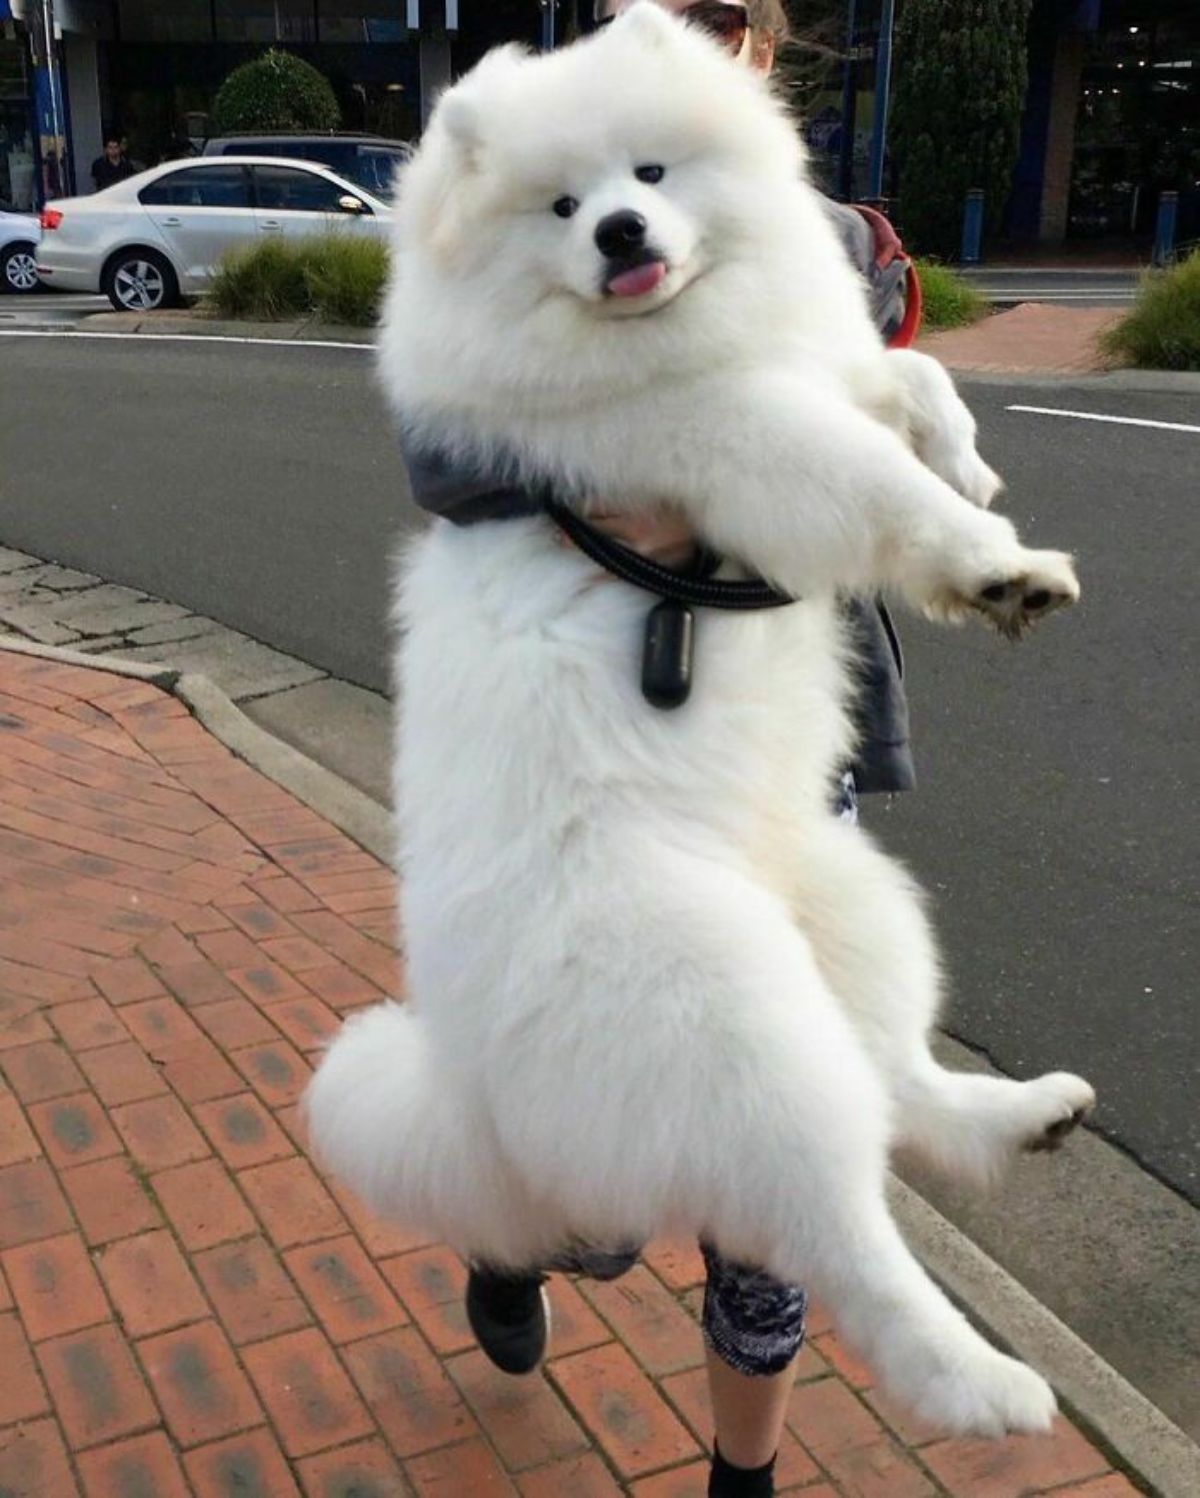 someone holding up a fluffy white samoyed that has the tongue sticking out slightly